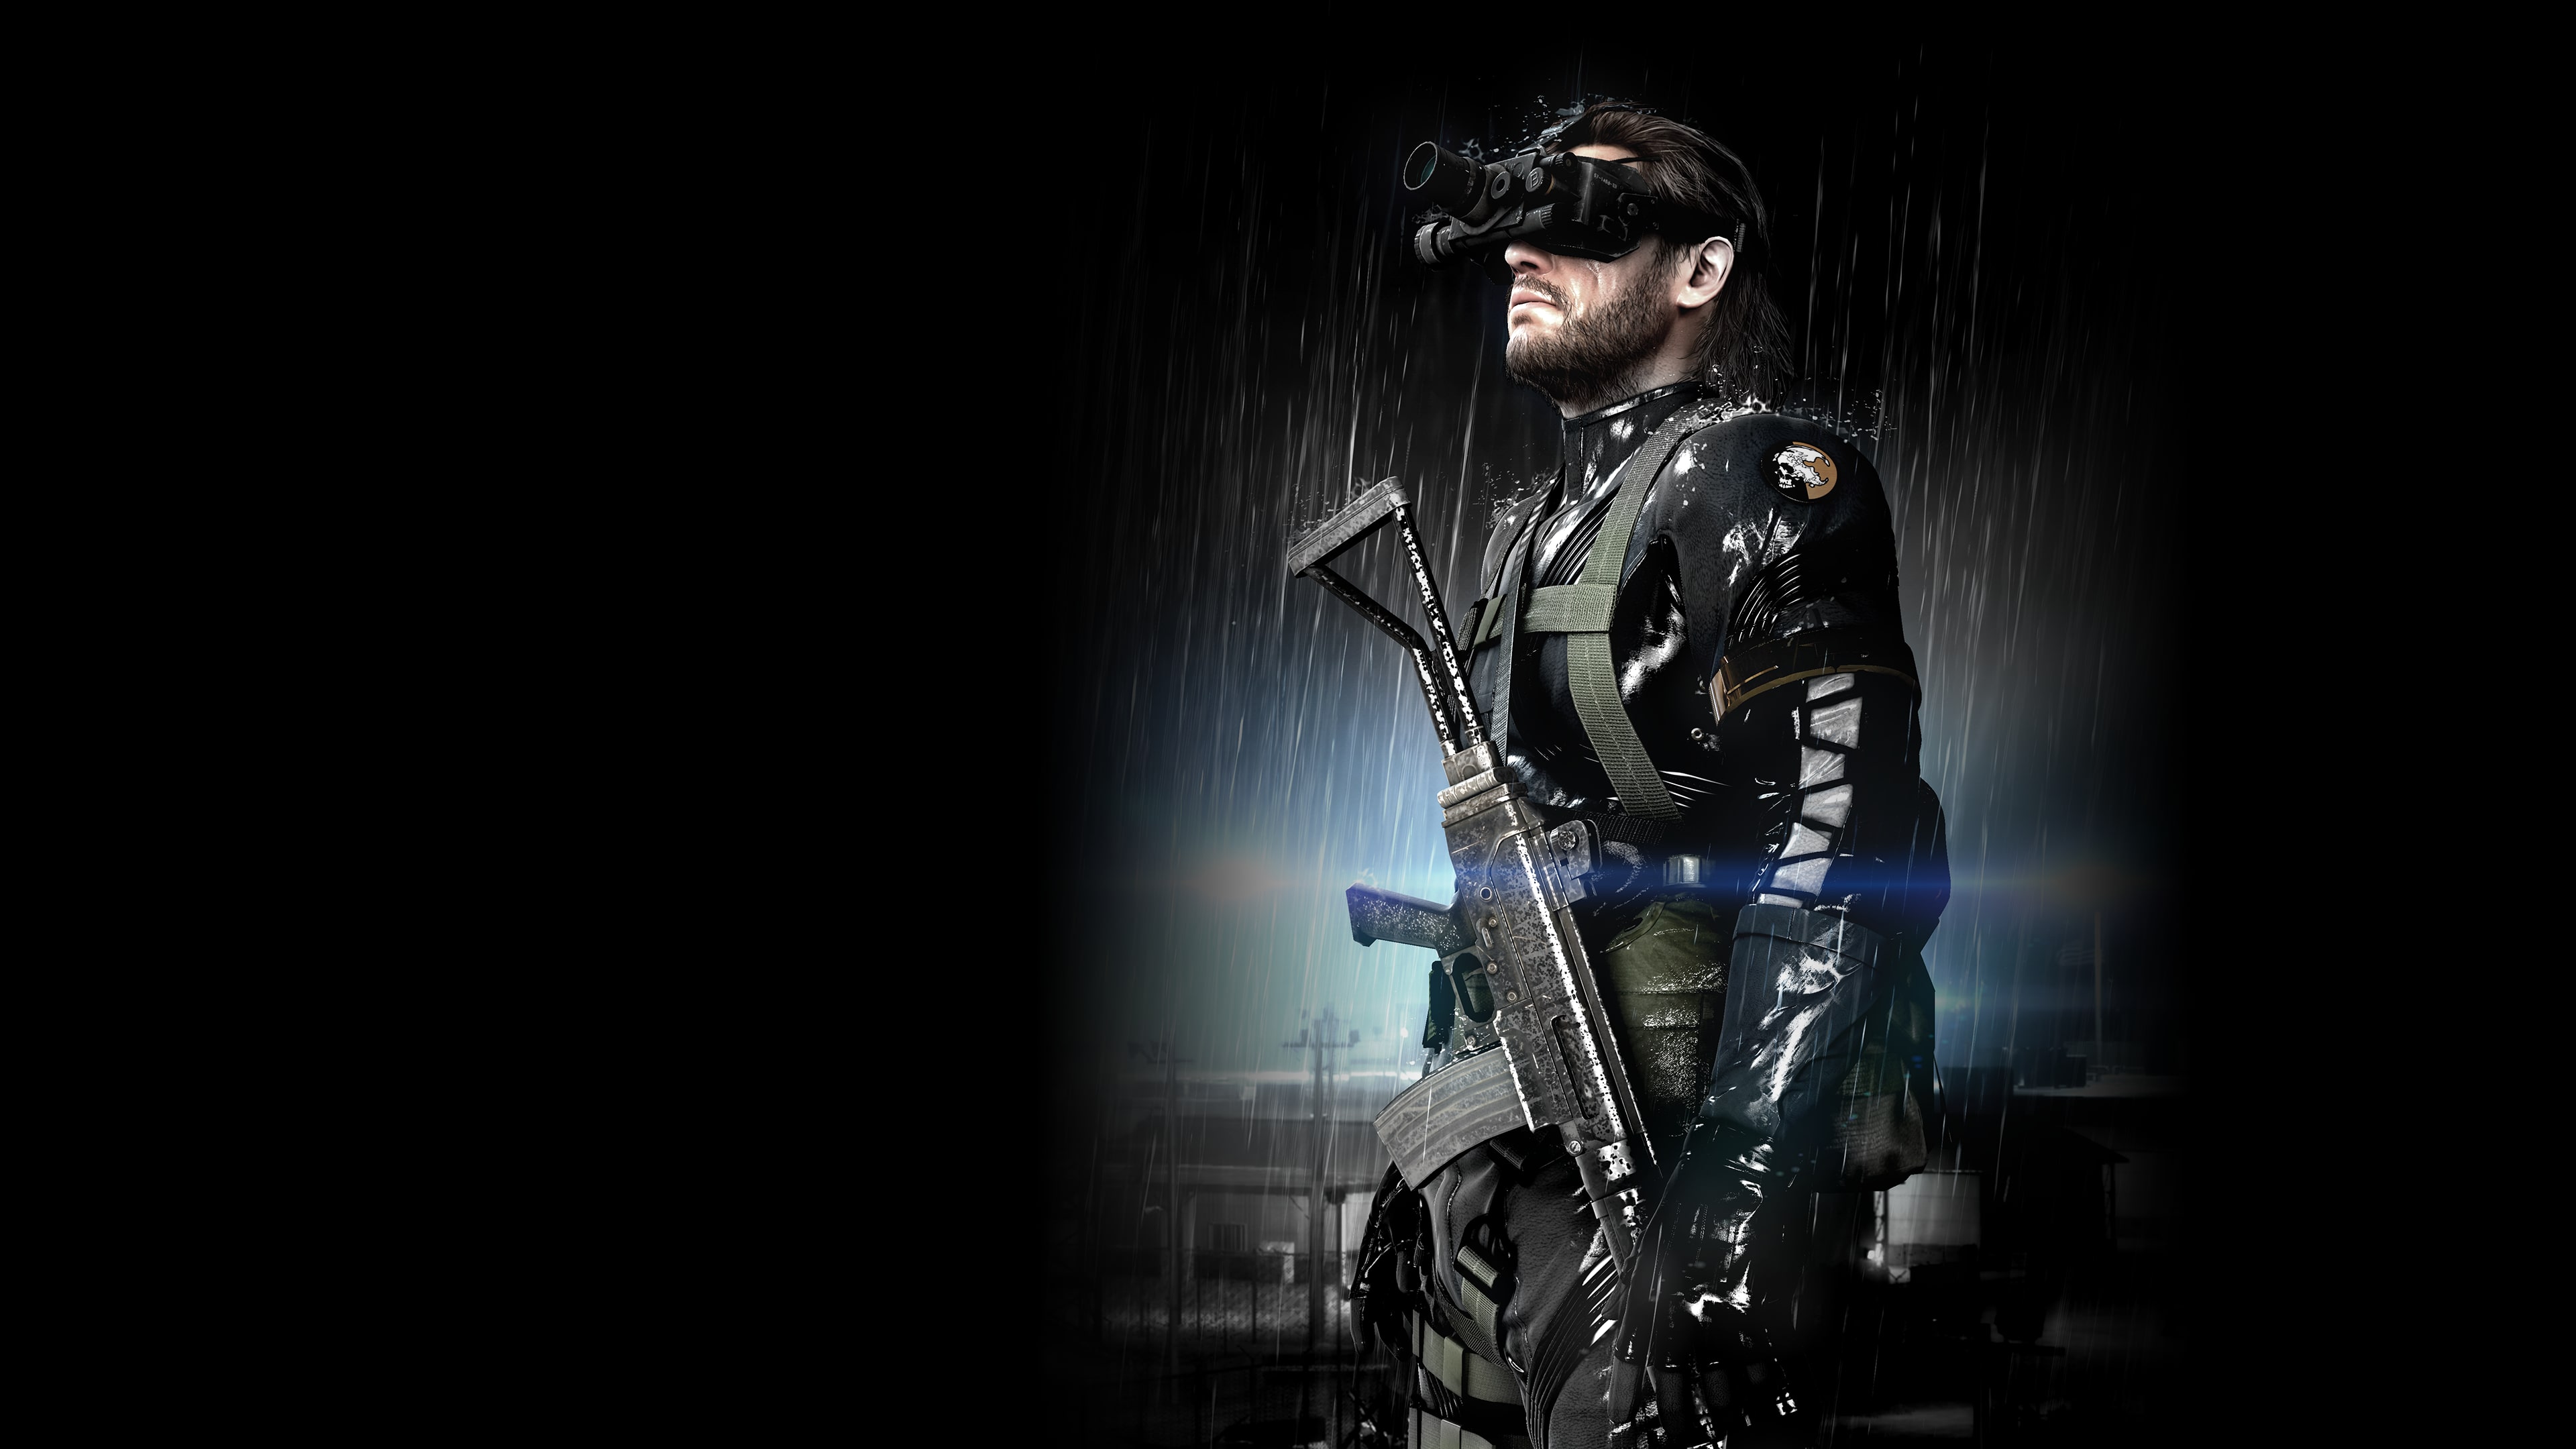 METAL GEAR SOLID V: GROUND ZEROES full game (Japanese Ver.)